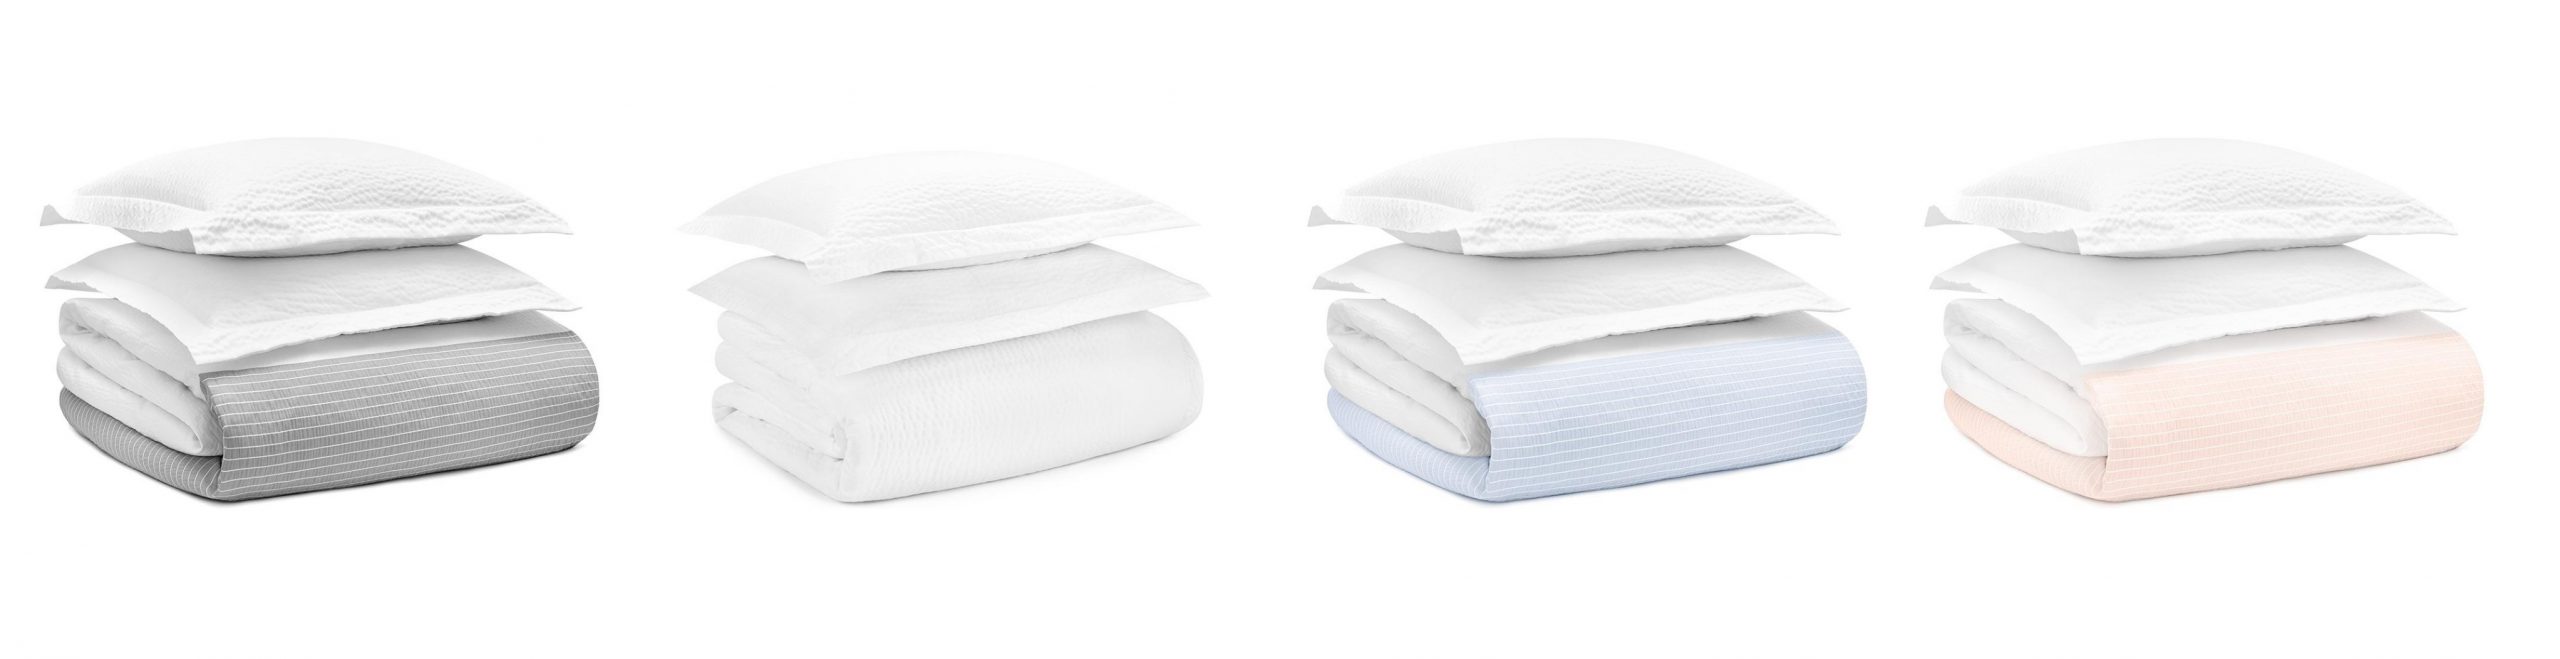 the different color options available for the Cumulus duvet cover set